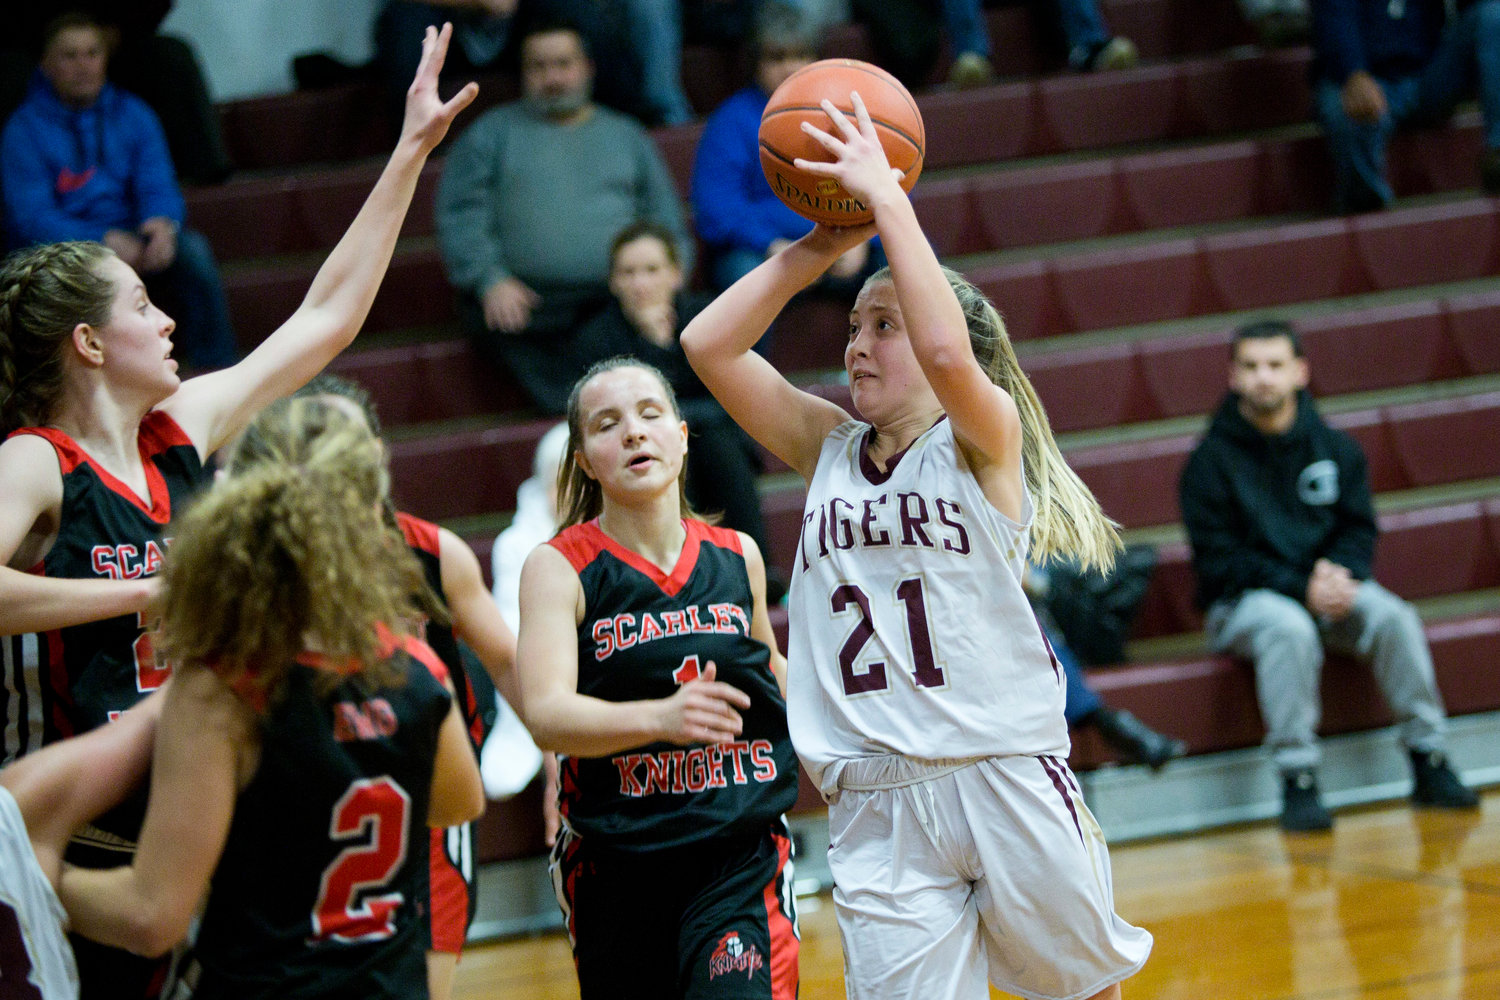 Tiverton's Maria Ramos closes in for a shot.